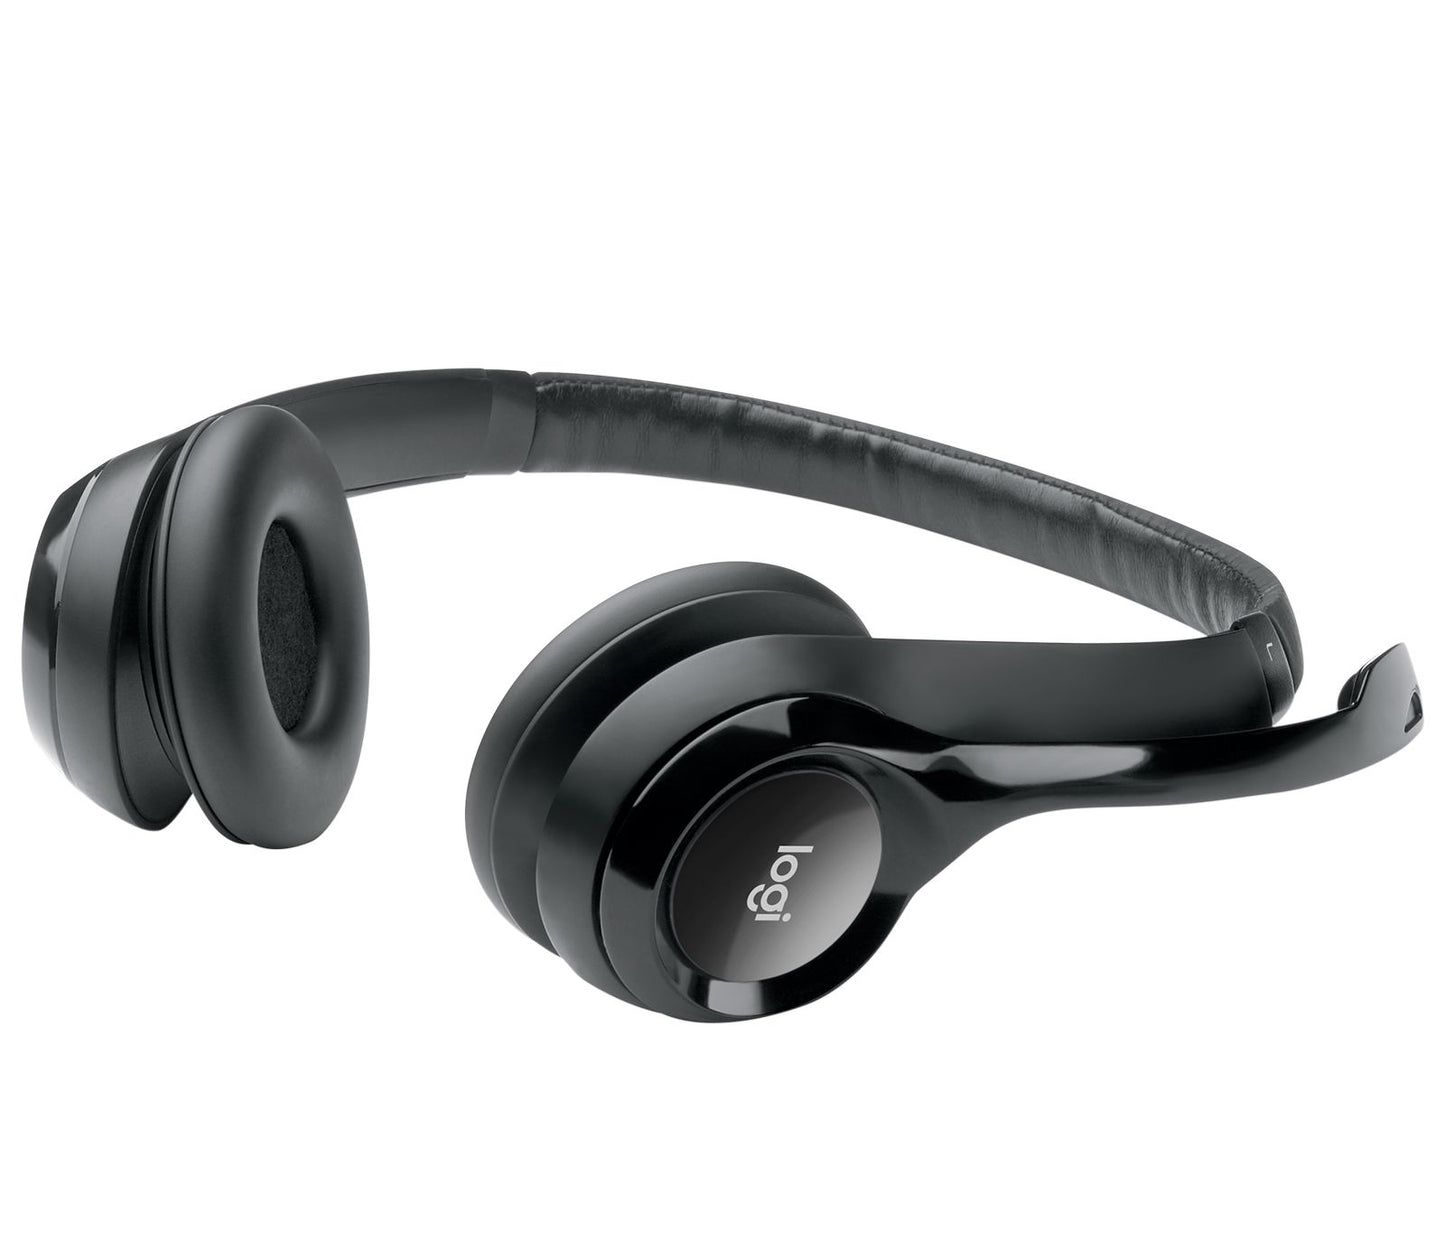 Logitech H390 USB Computer Headset with Noise-Cancelling Mic Enhanced Digital Sound In-Line Controls